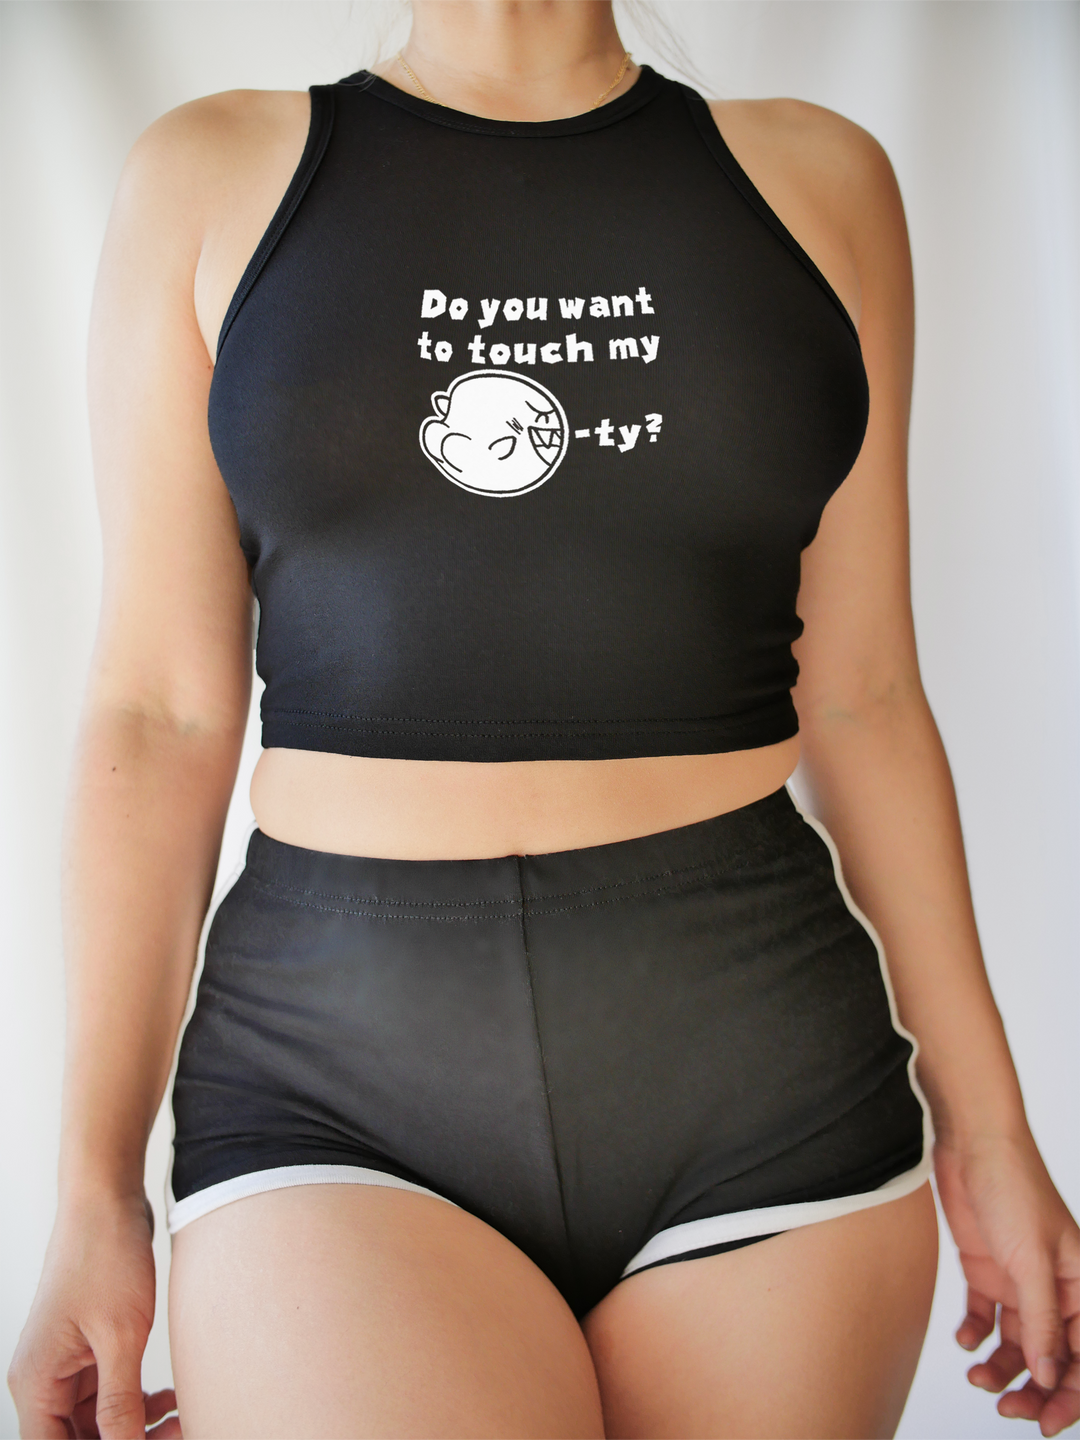 Do You Want To Tough My Boo-ty? Cropped Tank Top